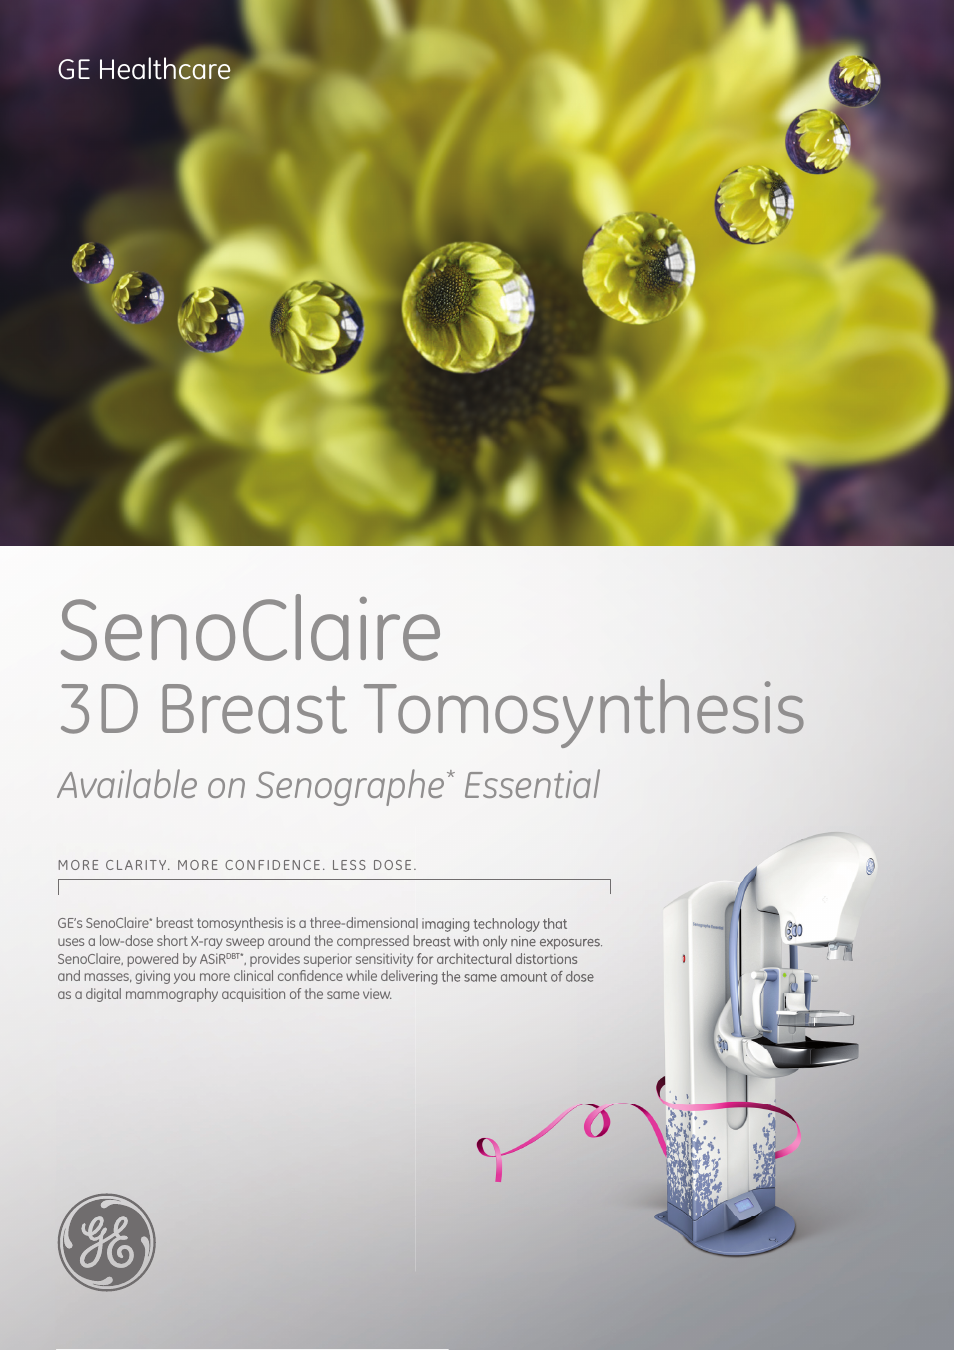 SenoClaire 3D Breast Tomosynthesis